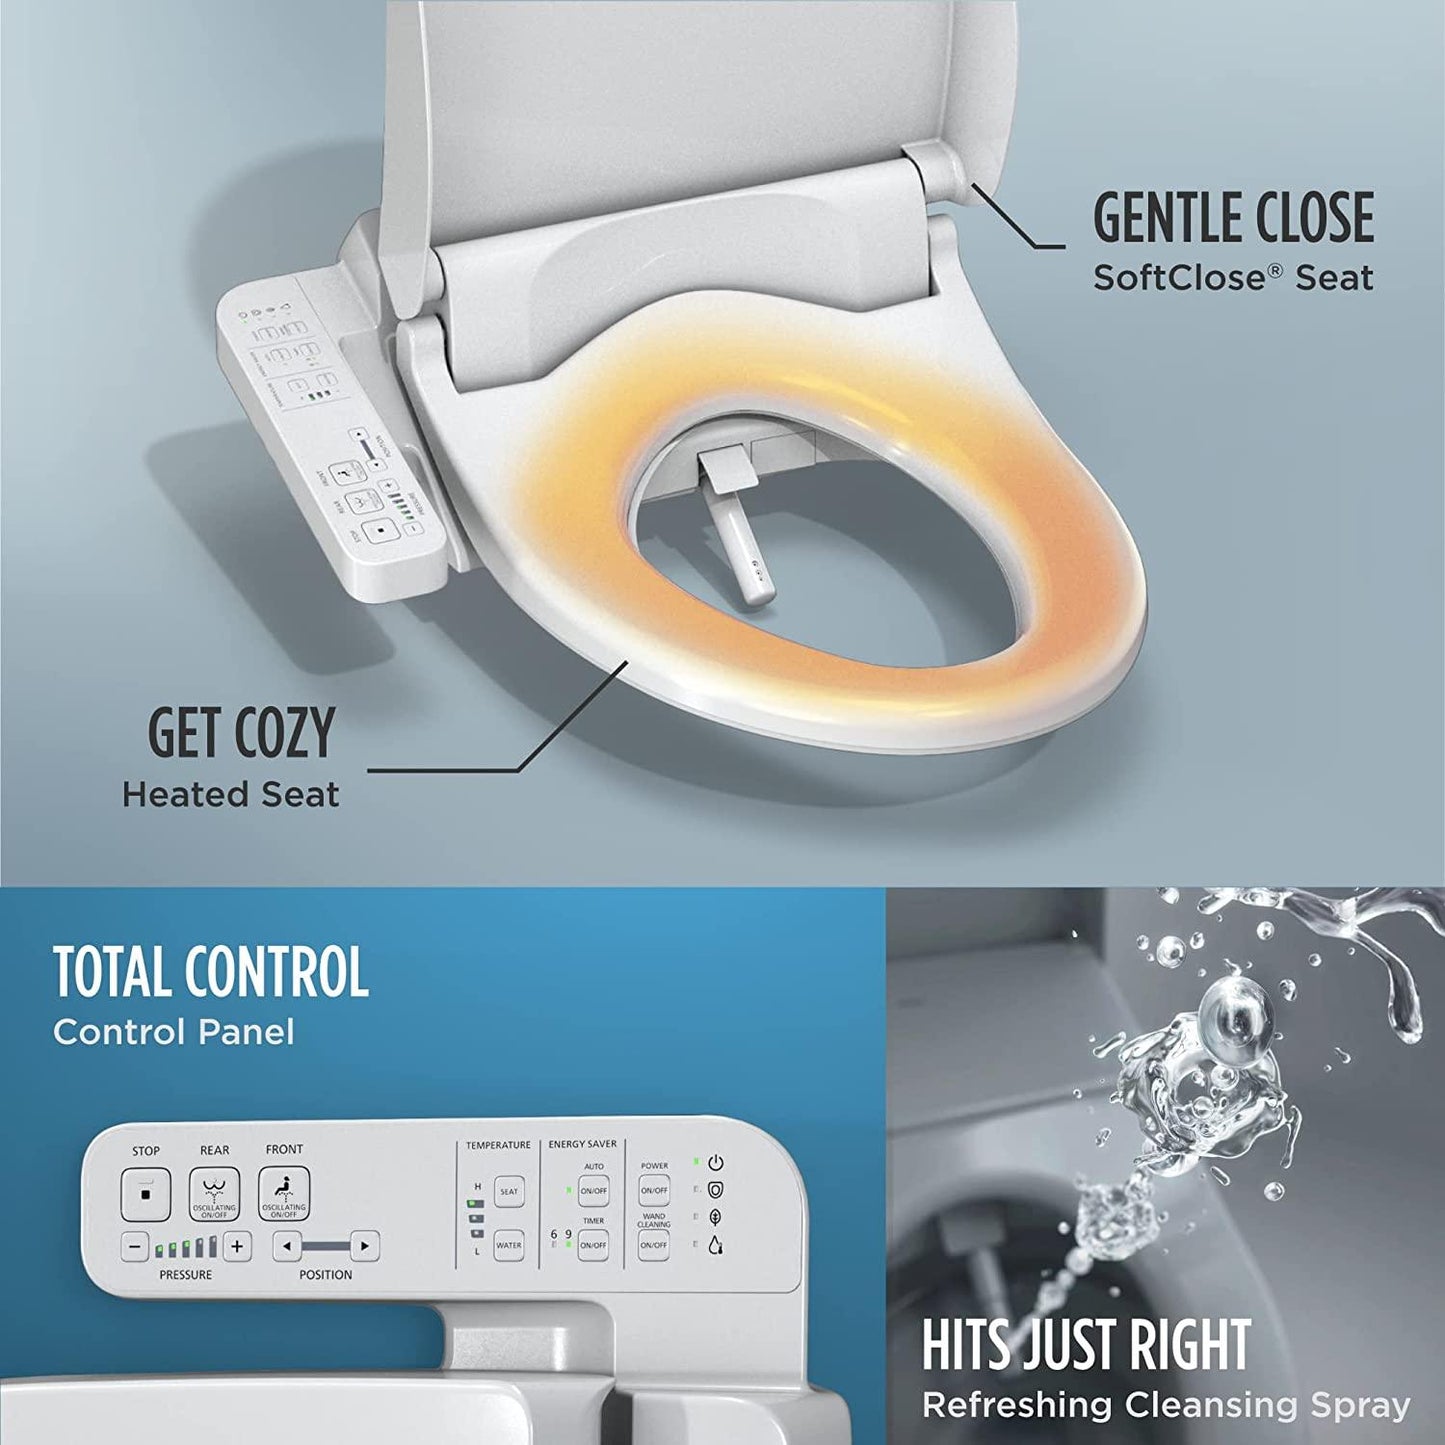 TOTO WASHLET A2,Electronic Toilet Seat with Heated Seat and SoftClose Lid, Elongated, Cotton White - YOURISHOP.COM